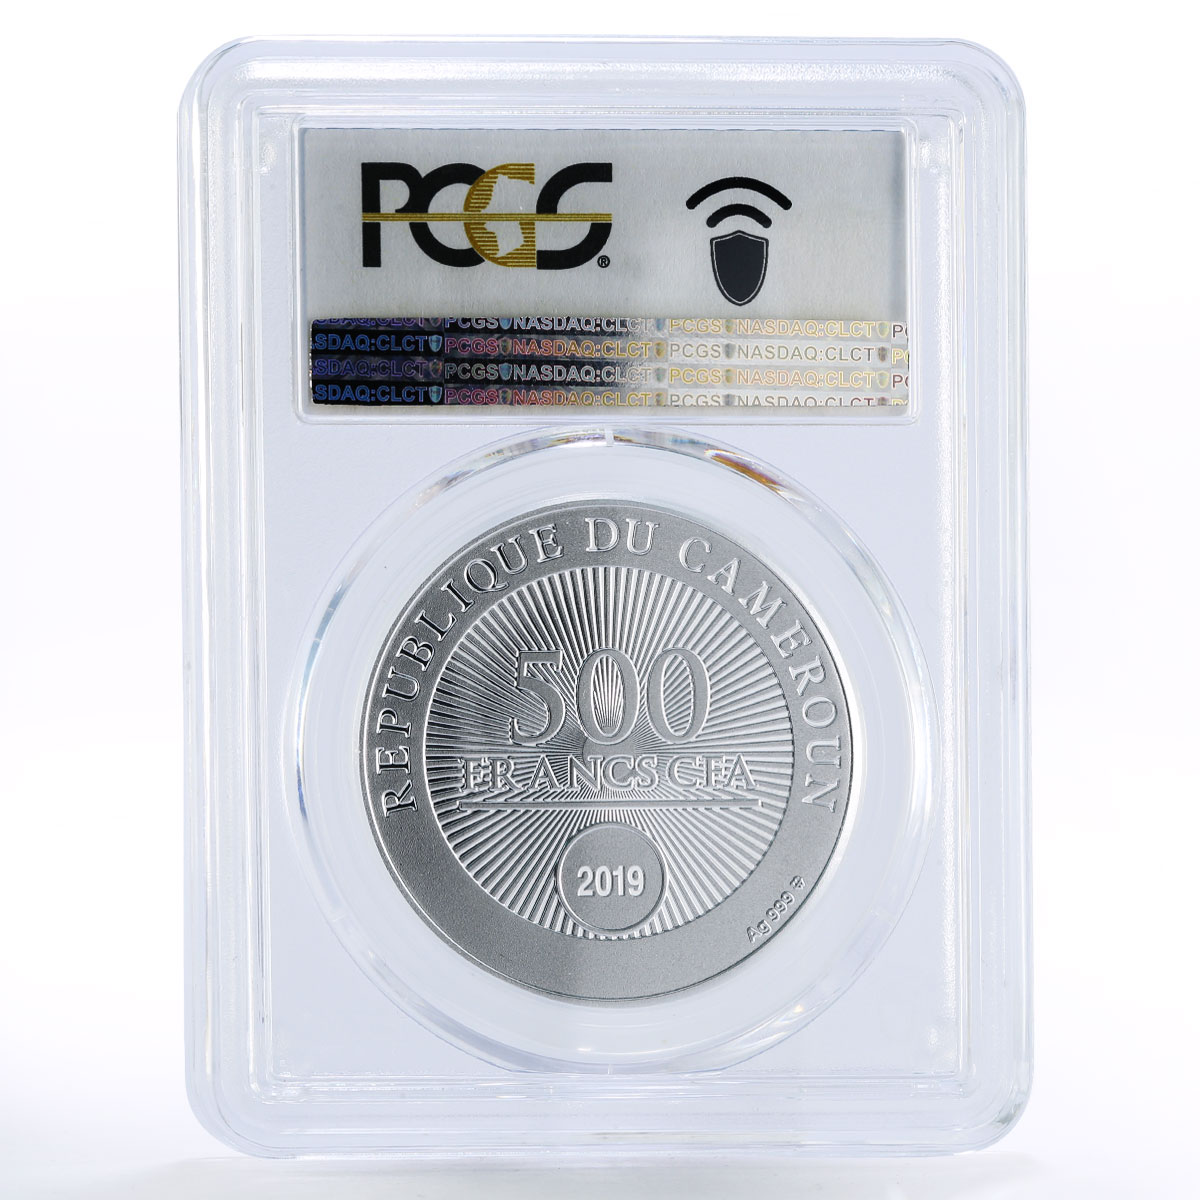 Cameroon 500 francs I Love You PR70 PCGS colored proof silver coin 2019